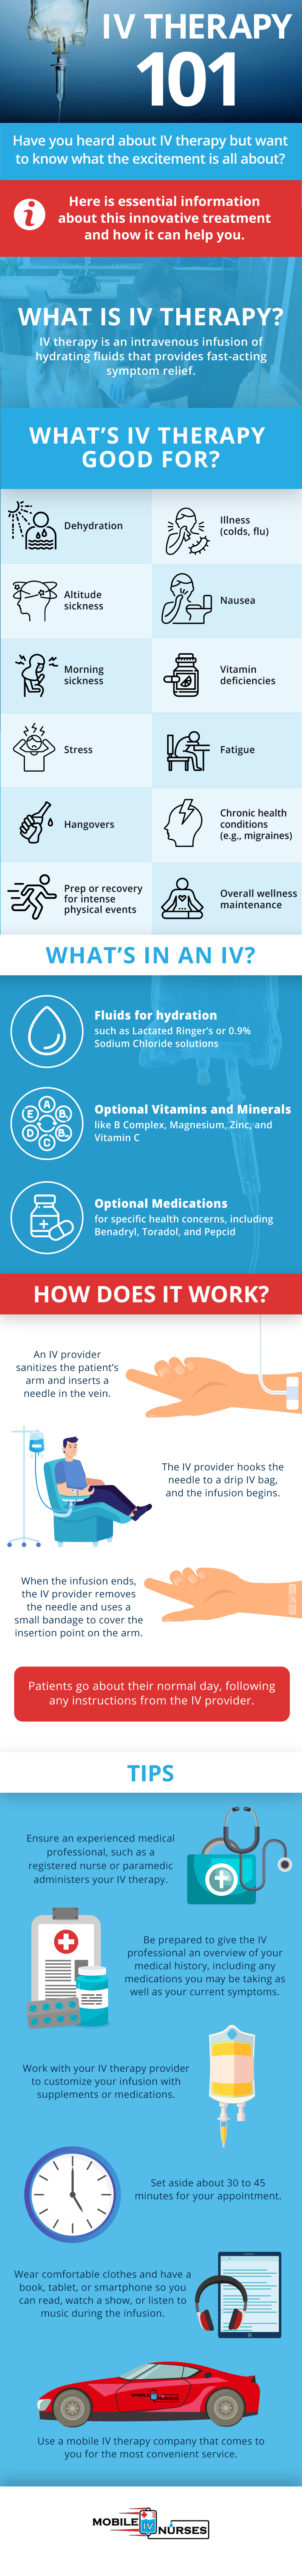 What is IV Therapy Infographic